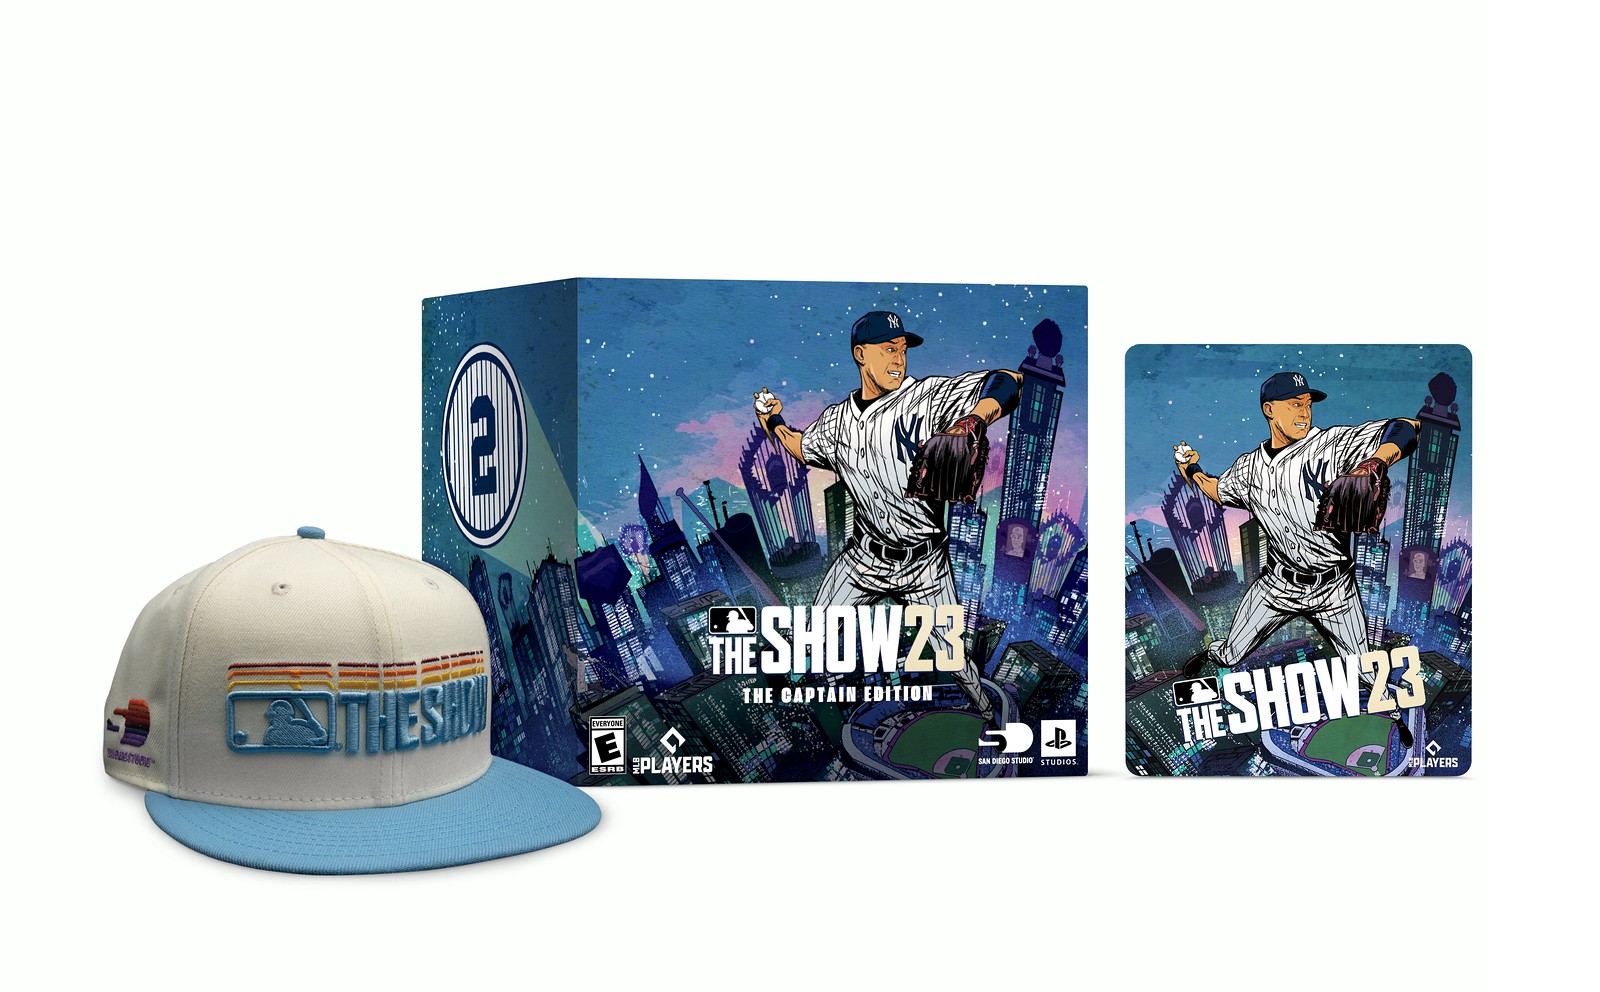 MLB The Show 23 Collector's Edition Details - Four Days Early Access